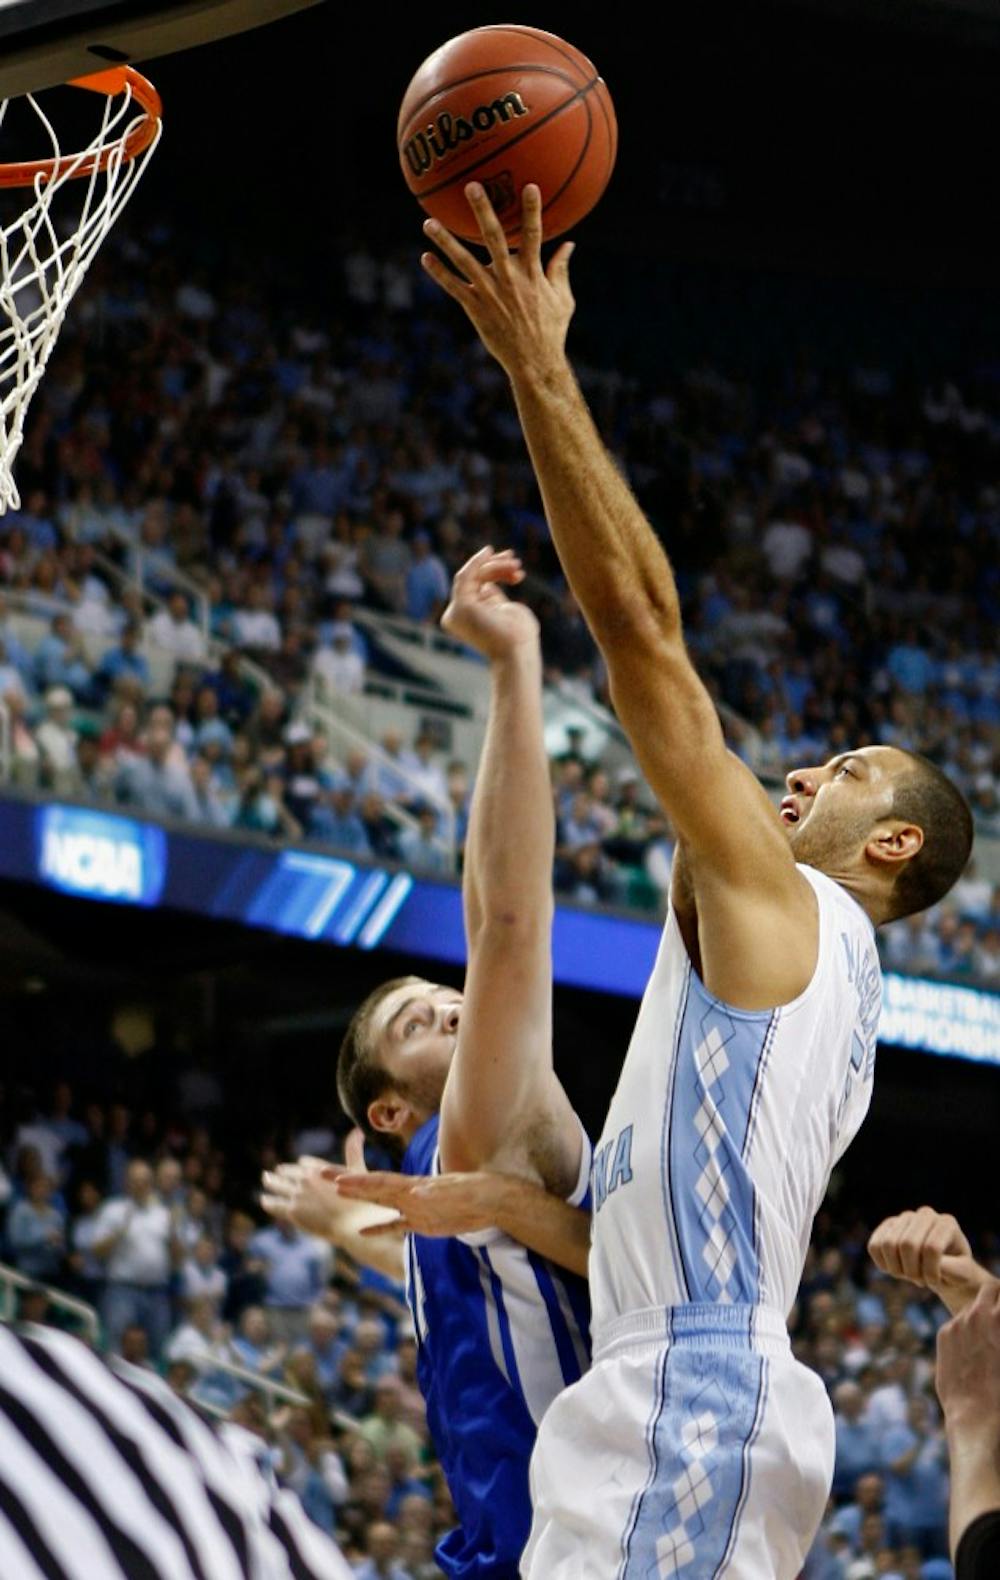 UNC guard Kendall Marshall takes the ball to the hoop during the first half. Marshall led the Tar Heels in scoring with 18 points in the 87-73 win over Creighton in the third round of the NCAA Tournament at the Greensboro Coliseum on Sunday, March 18, 2012. Marshall injured his wrist in the second half of the game.